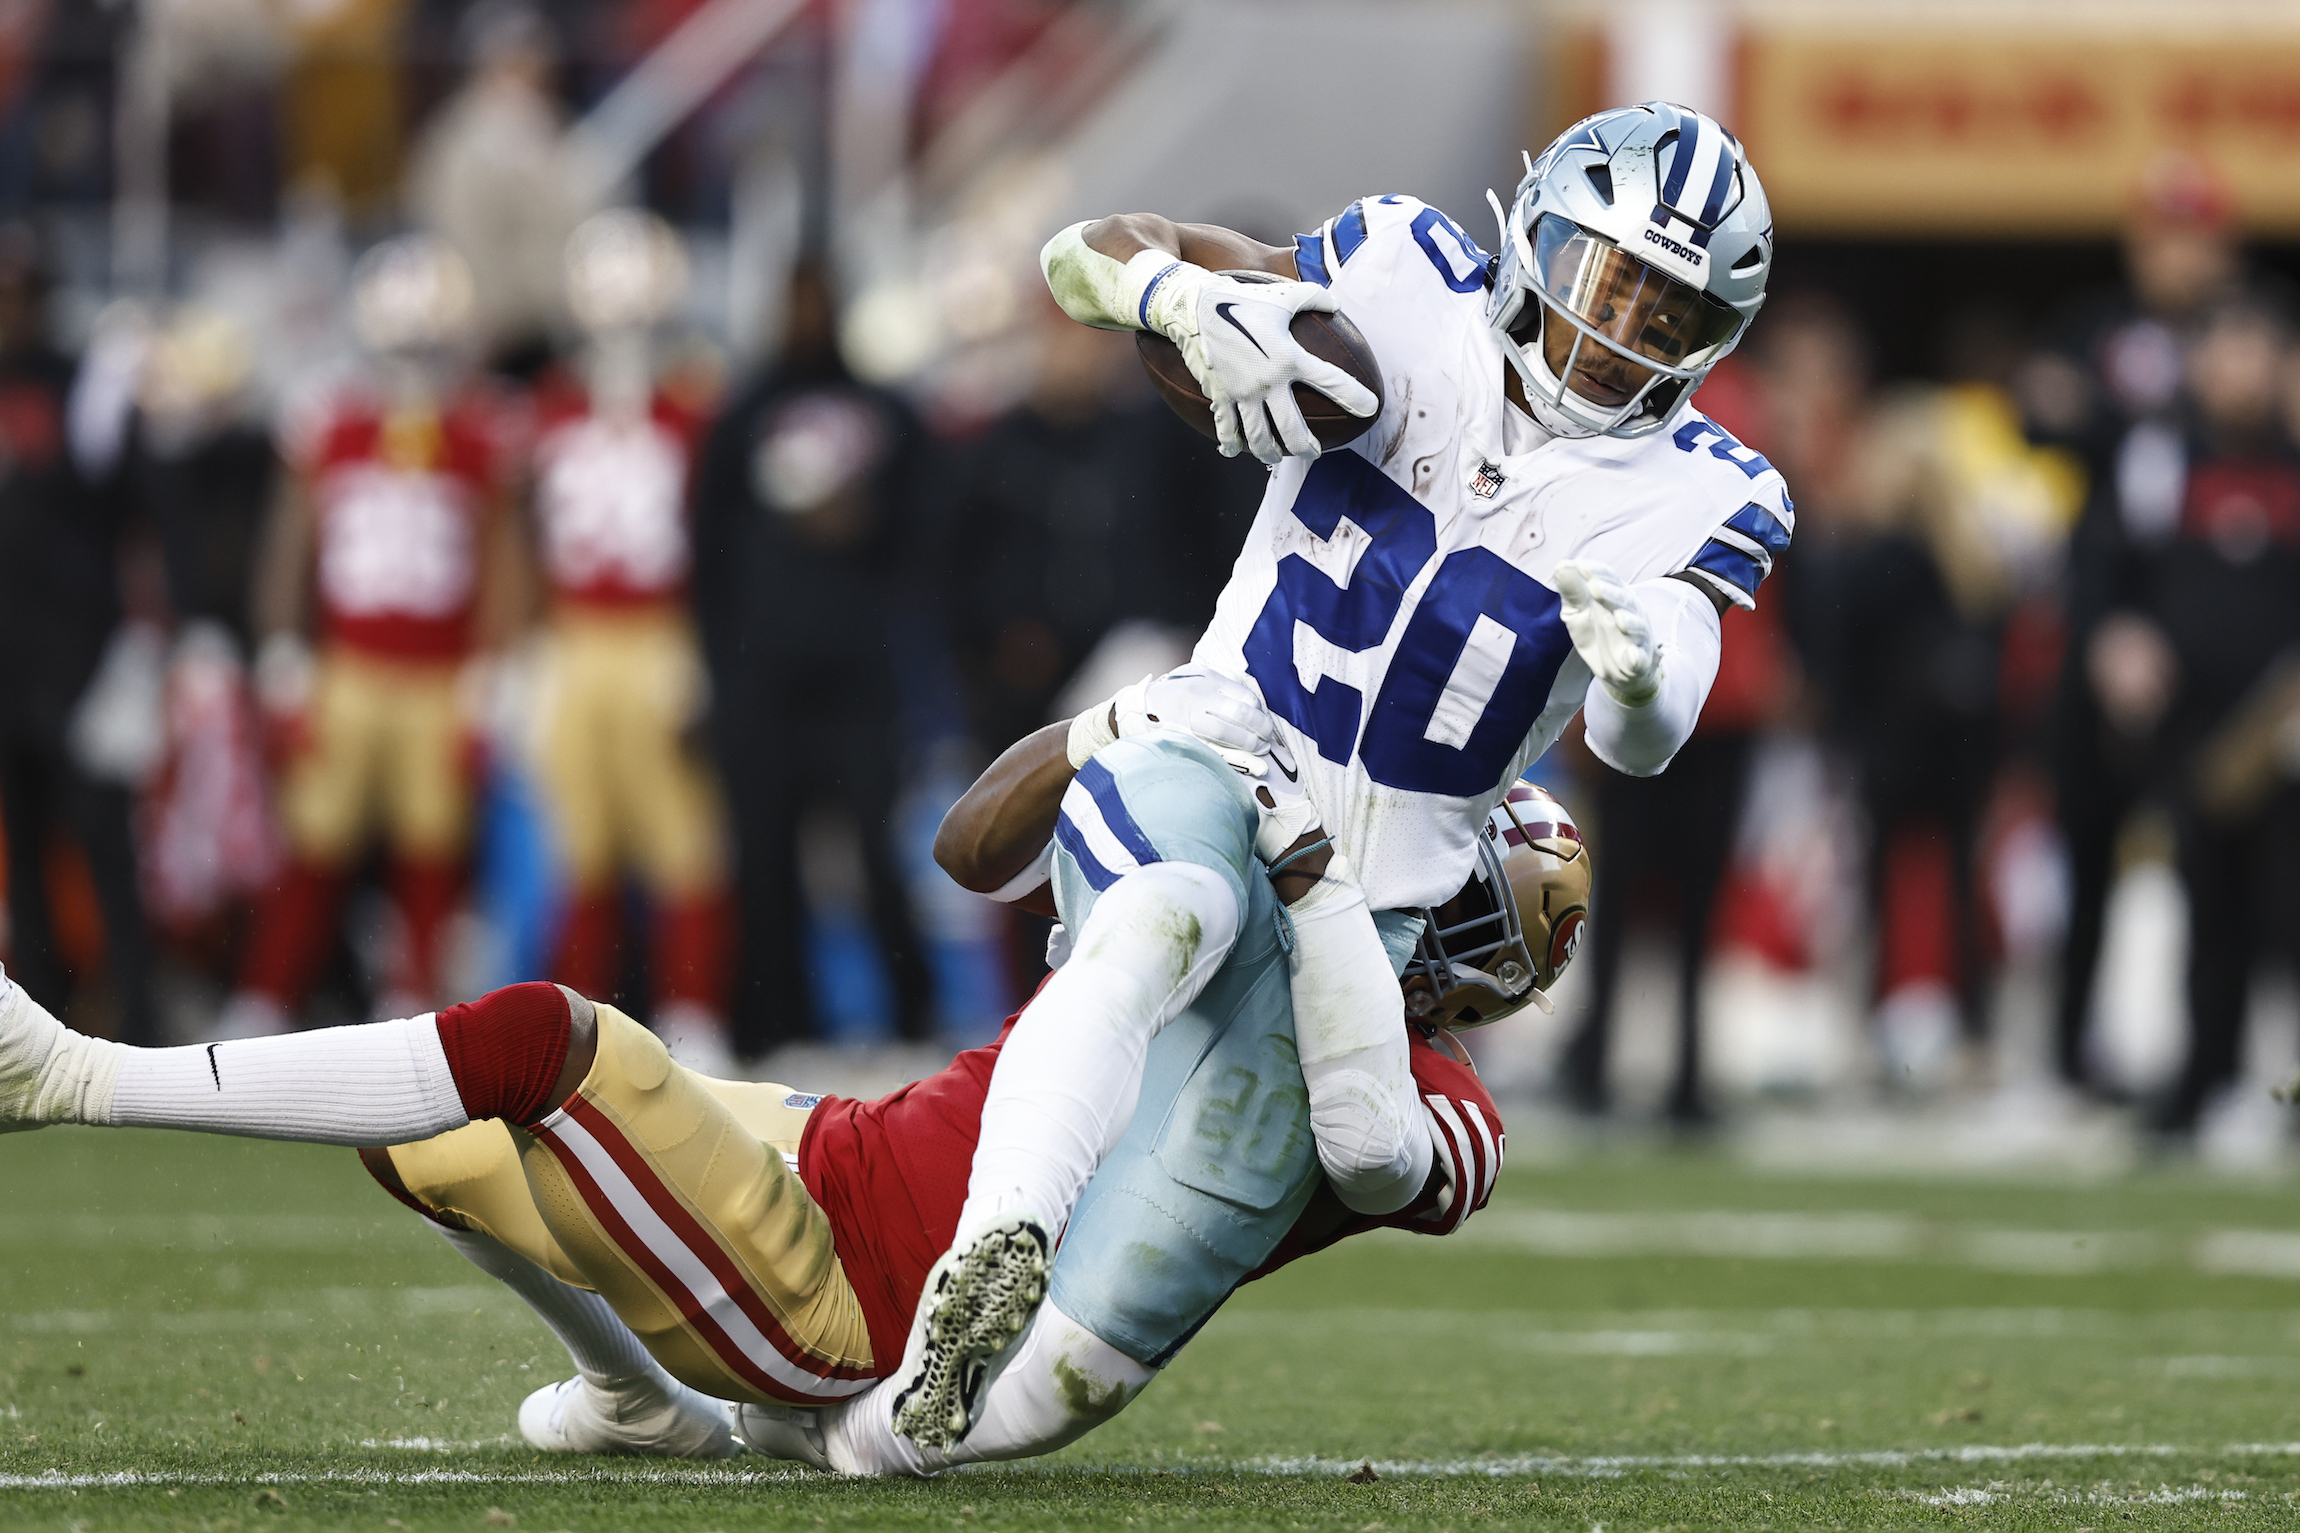 xx during an NFL divisional round playoff football game between the San Francisco 49ers and the Dallas Cowboys in Santa Clara, Calif., Sunday, Jan. 22, 2023. (Michael Owens via AP)